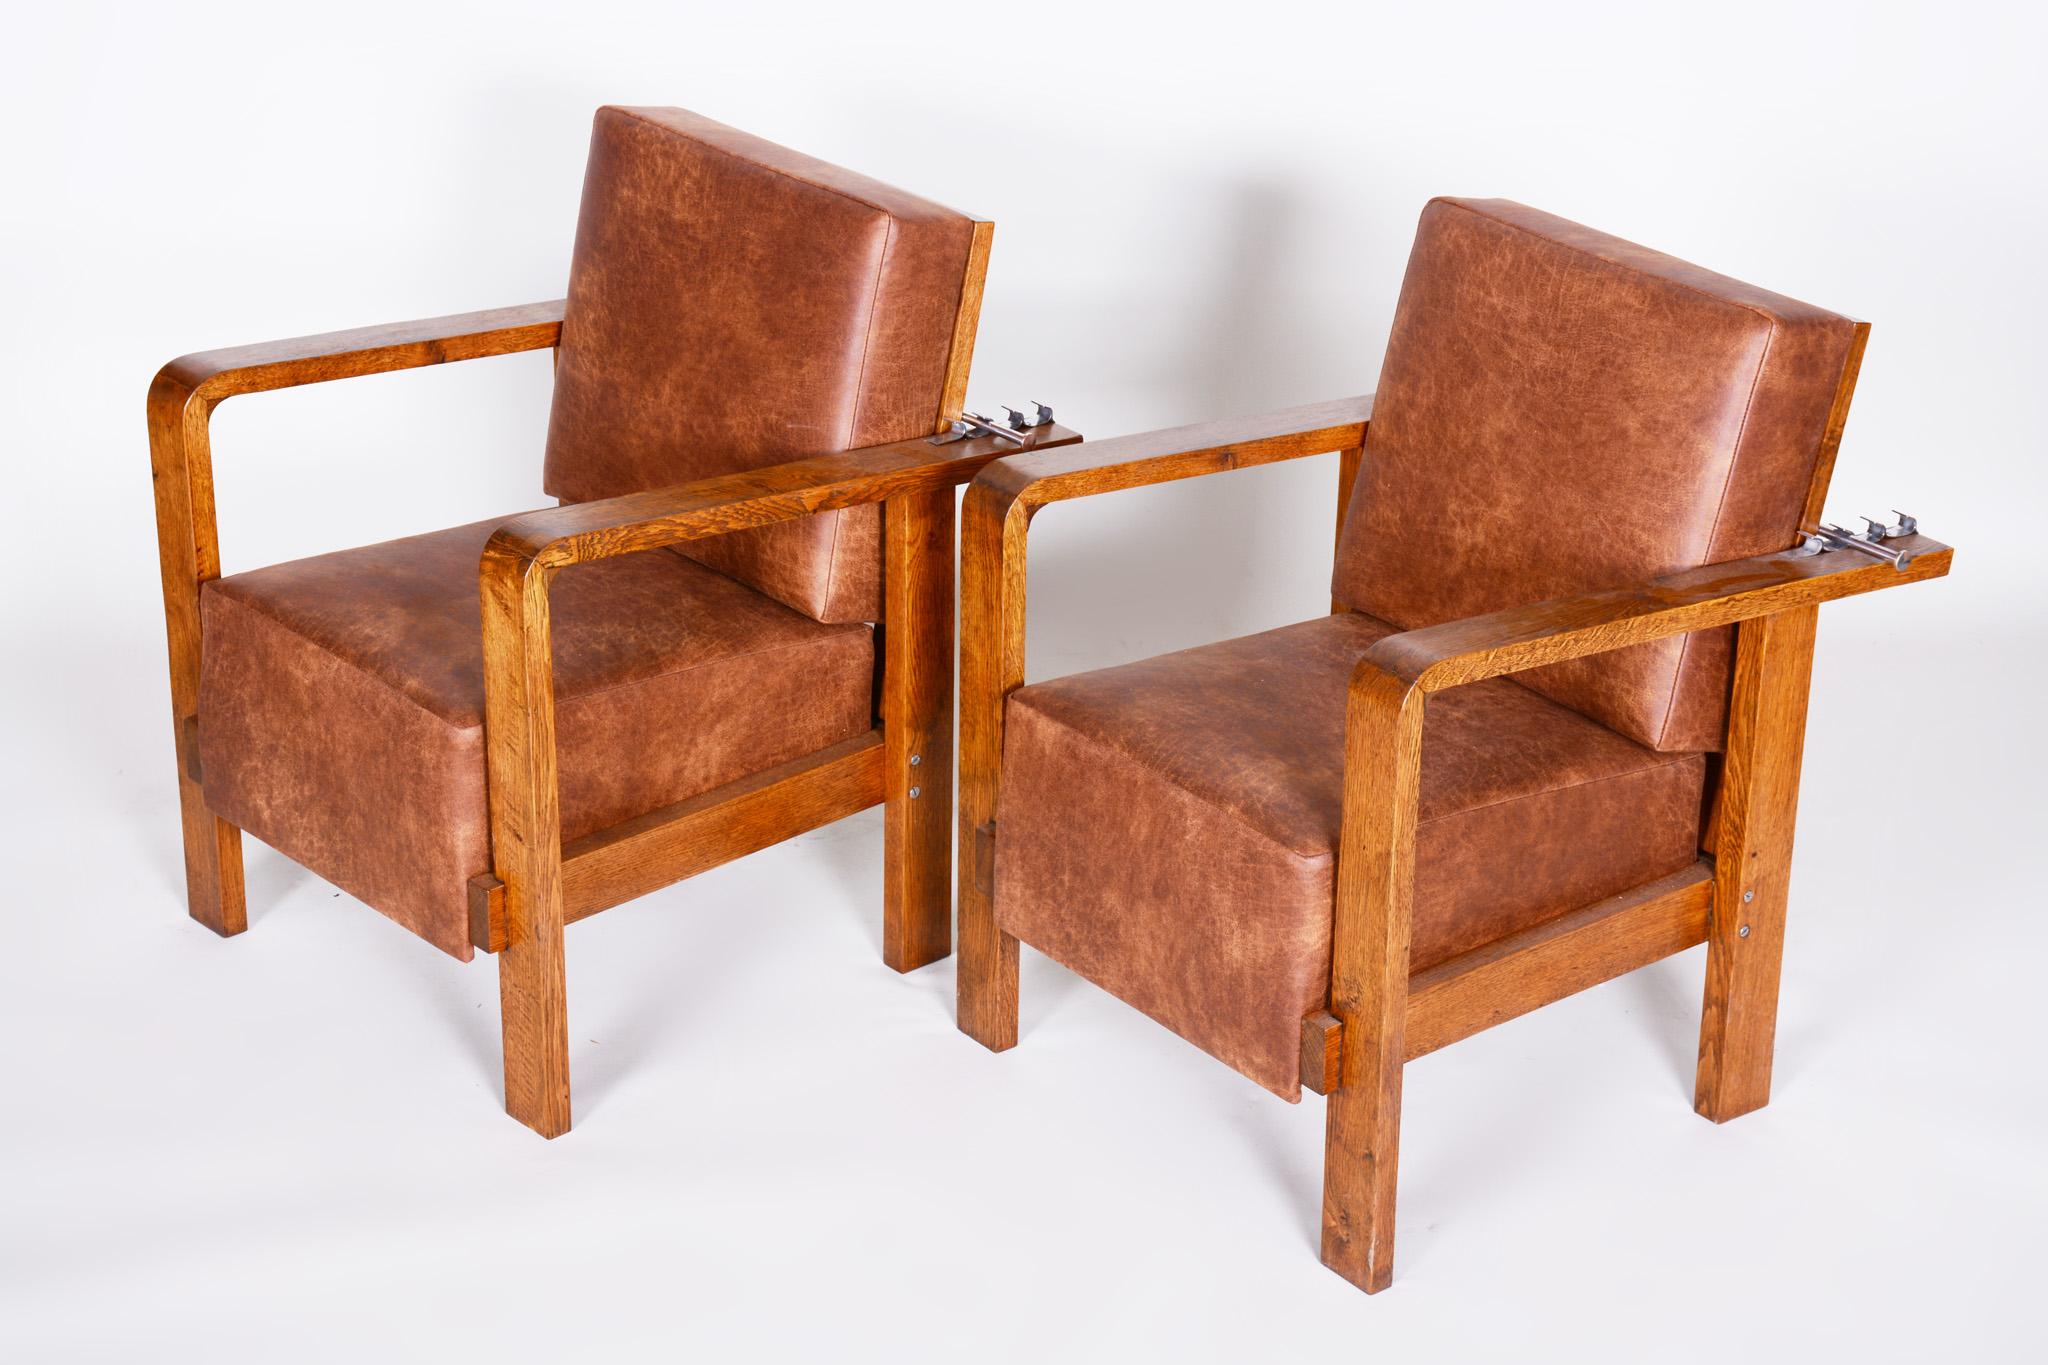 Pair of Czech Adjustable Functionalist Leather and Oak Armchairs, 1930s In Good Condition For Sale In Horomerice, CZ